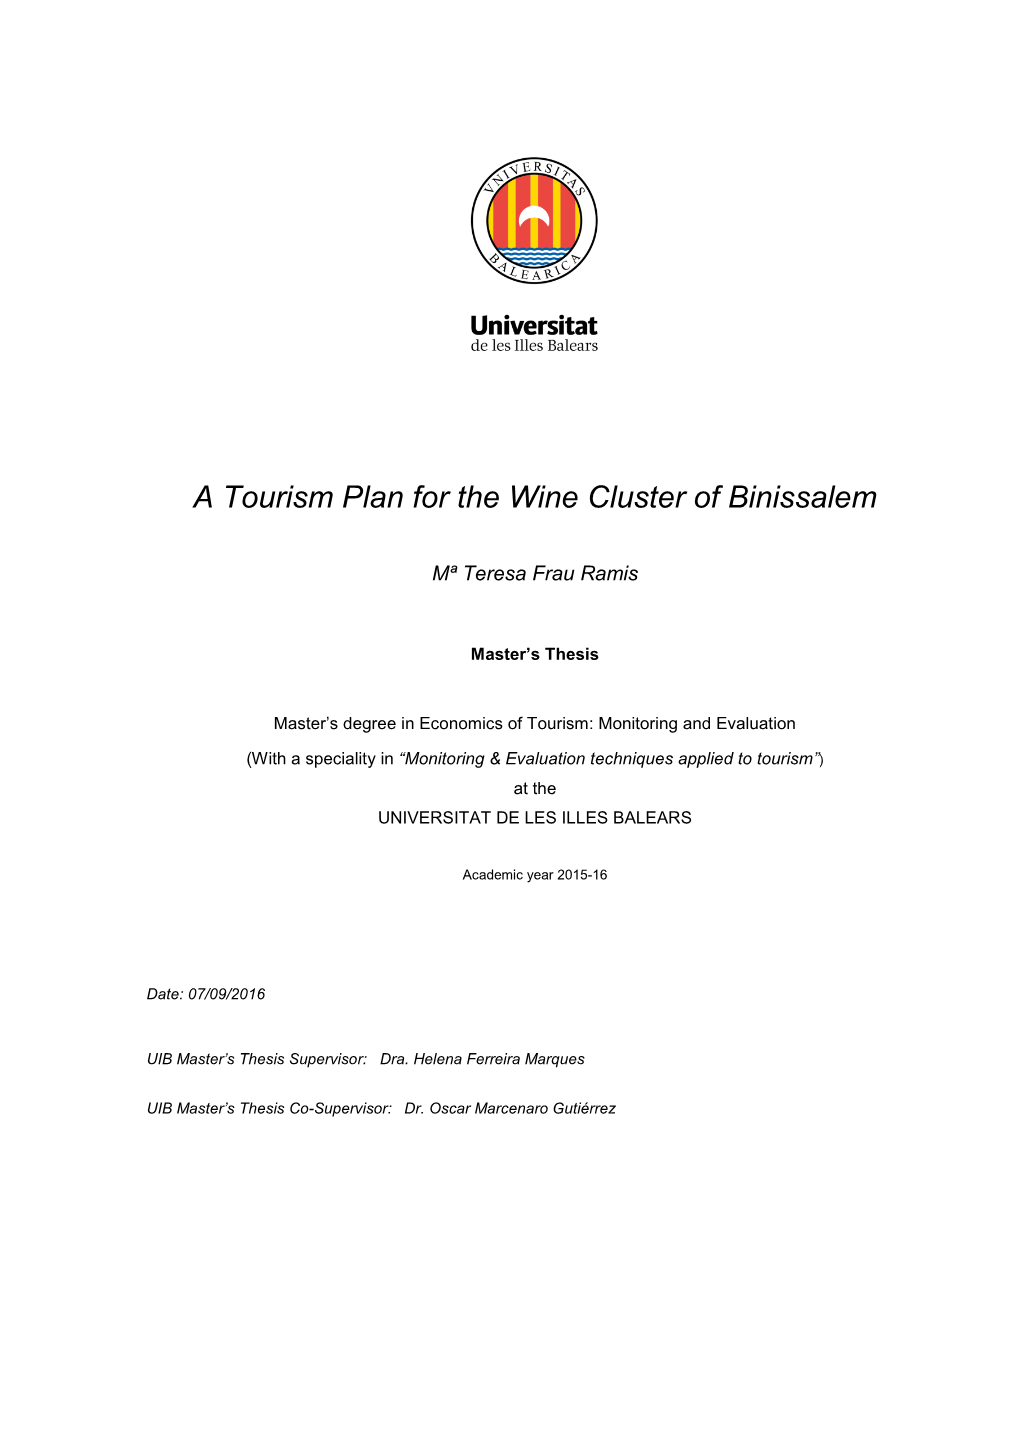 A Tourism Plan for the Wine Cluster of Binissalem